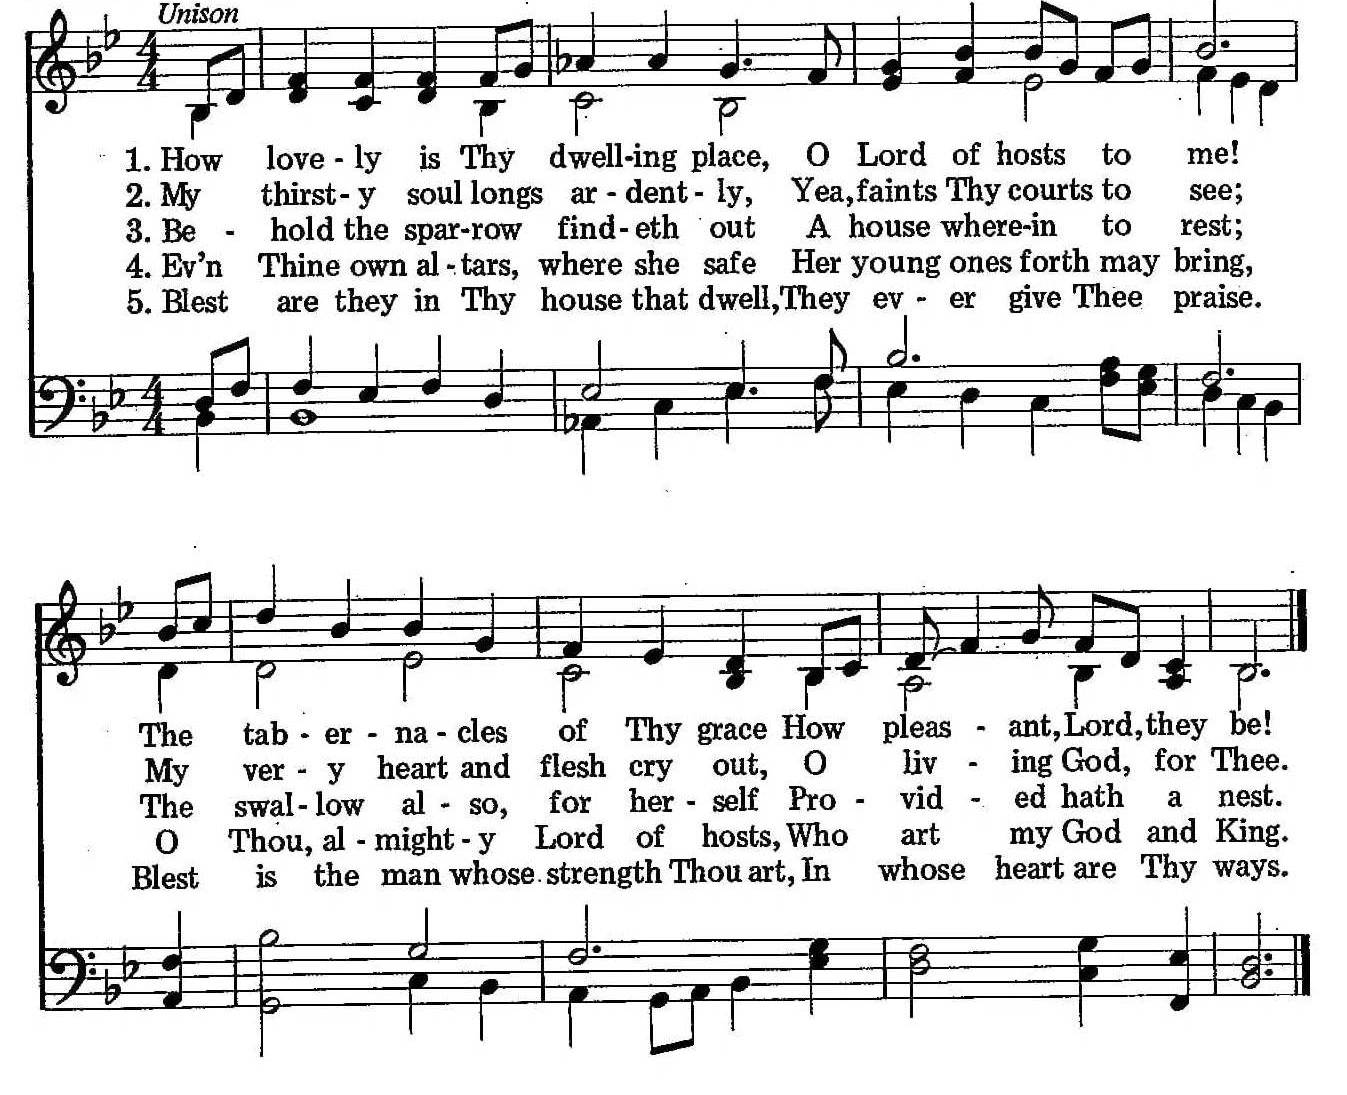 062 – How Lovely Is Thy Dwelling Place sheet music